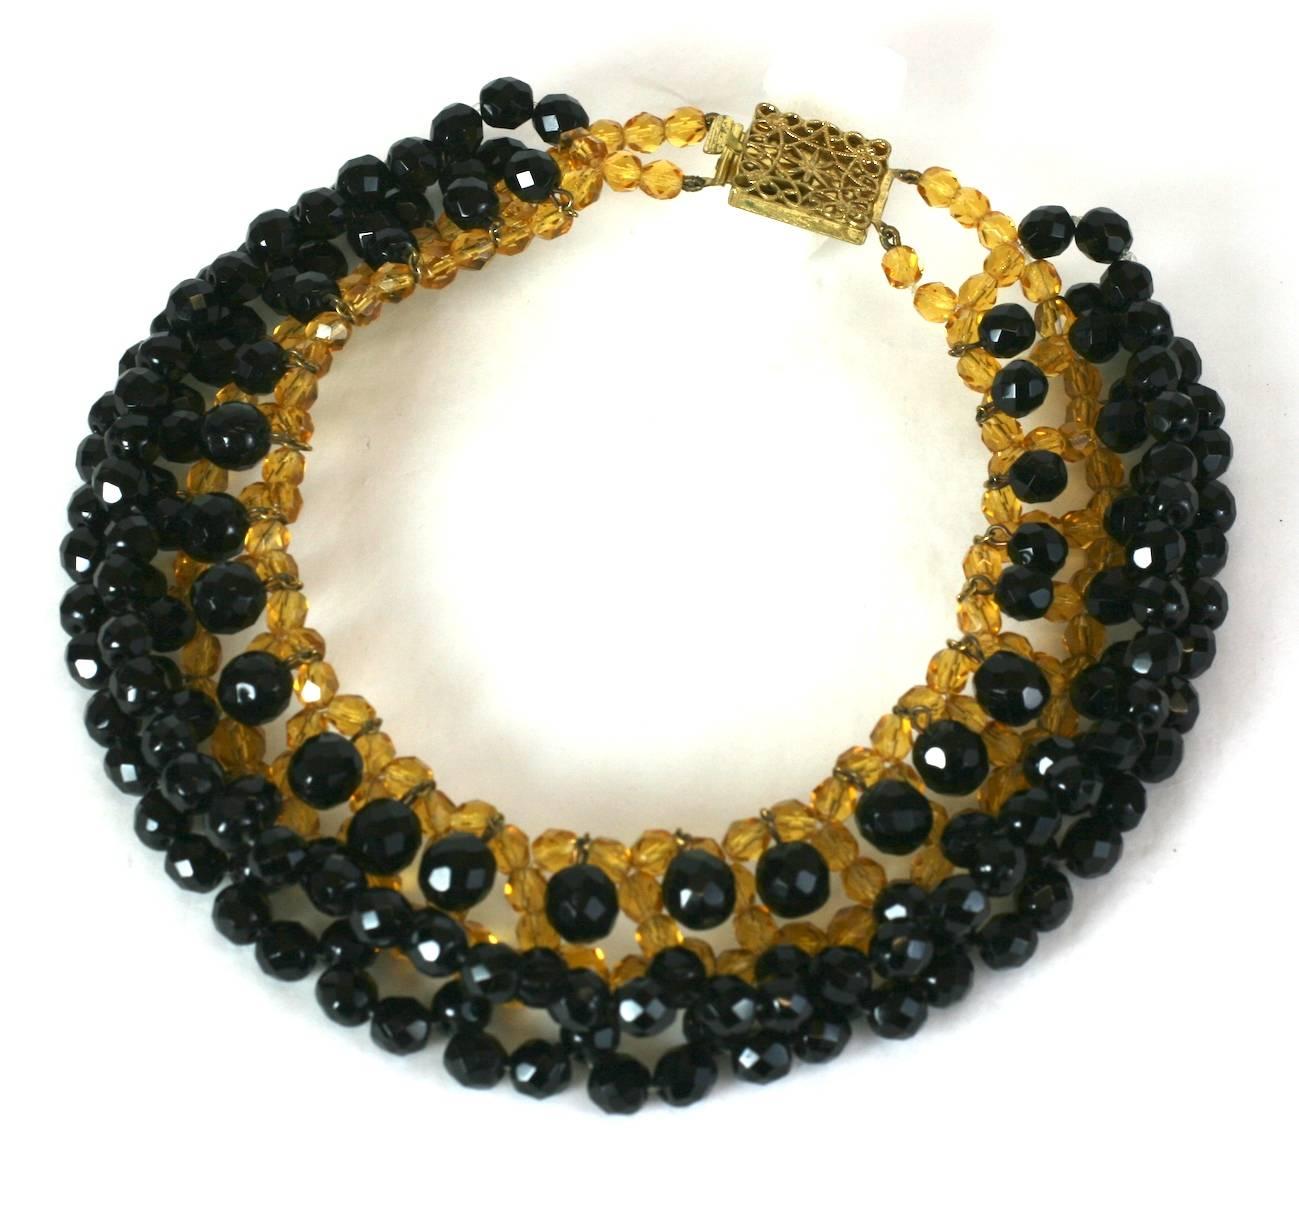 Elaborate Citrine and Jet Couture Collar of French origin from the 1950's. The hand woven base collar is composed of faux citrine beads, with an edging of of woven jets. Close to the neck, faceted jet beads hang loose and move with wearer.